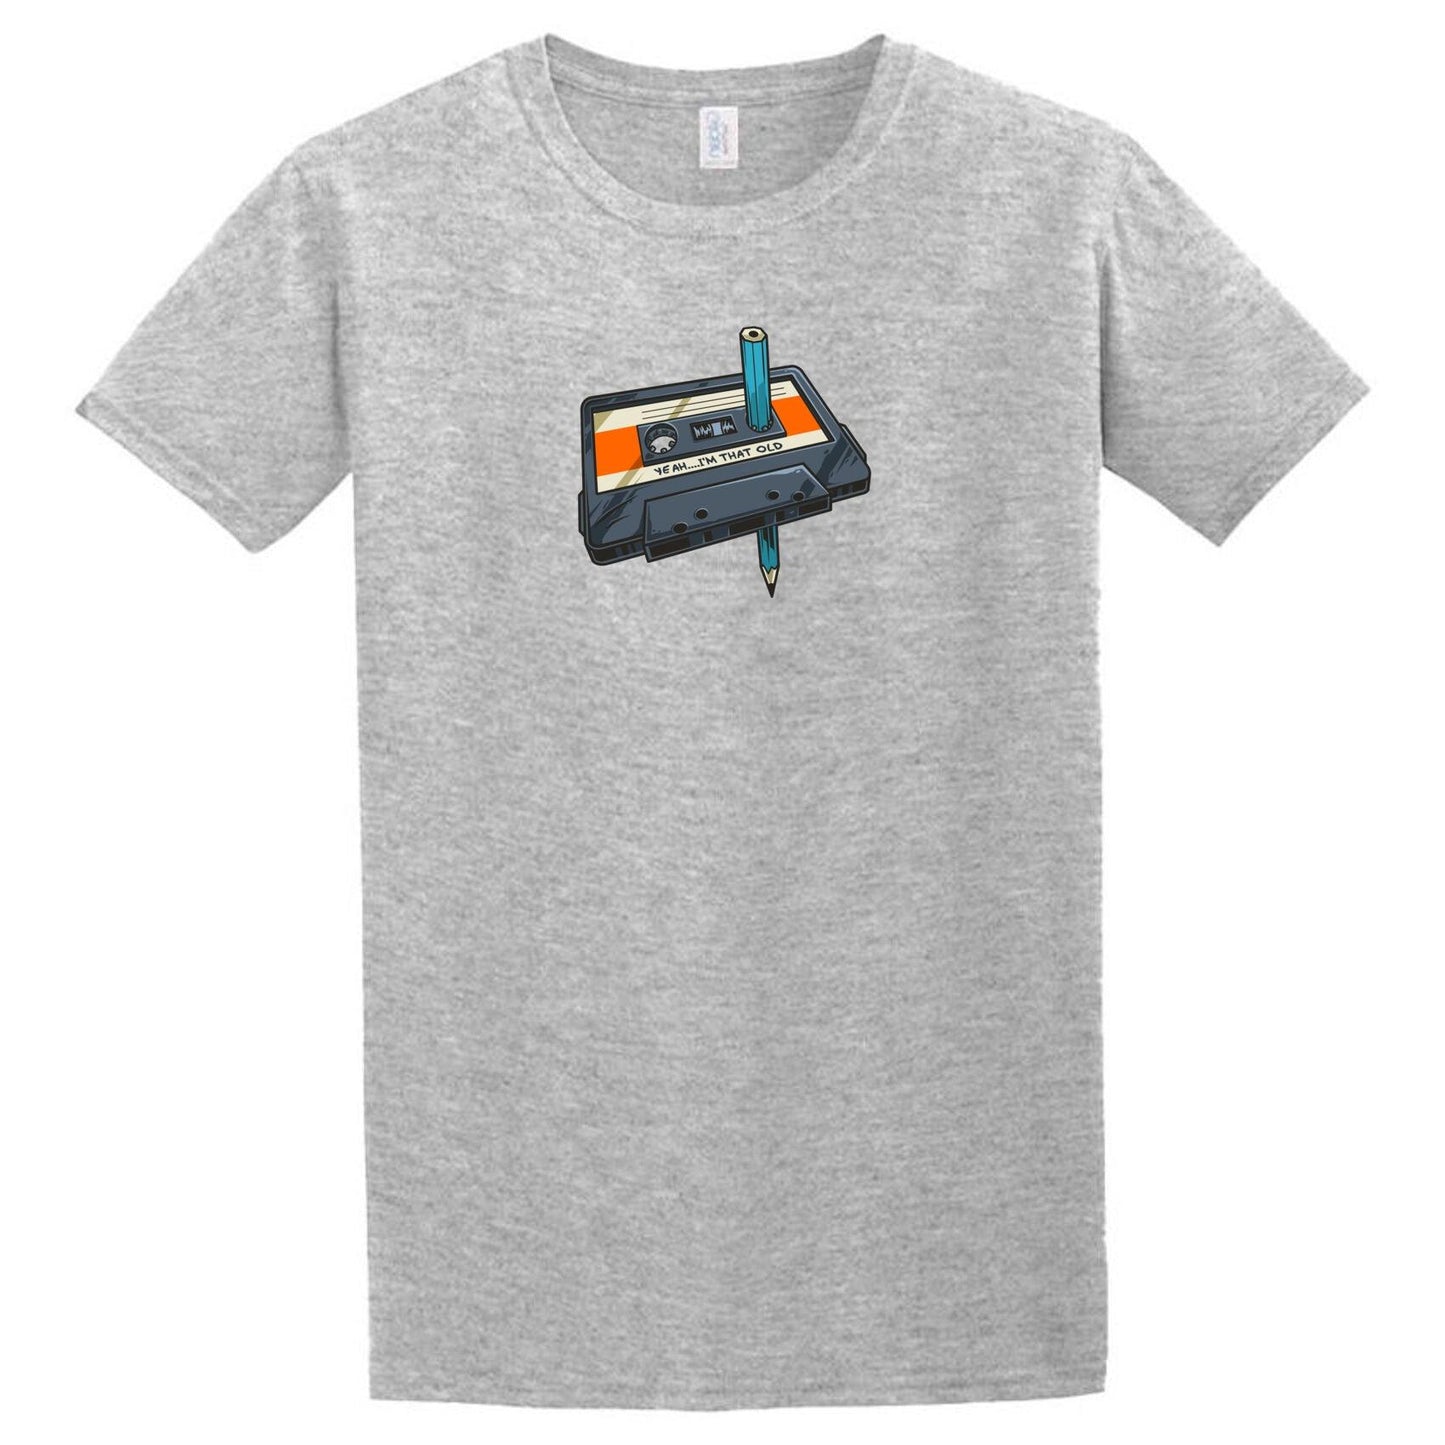 A grey That Old T-Shirt with a cassette tape on it by Twisted Gifts.